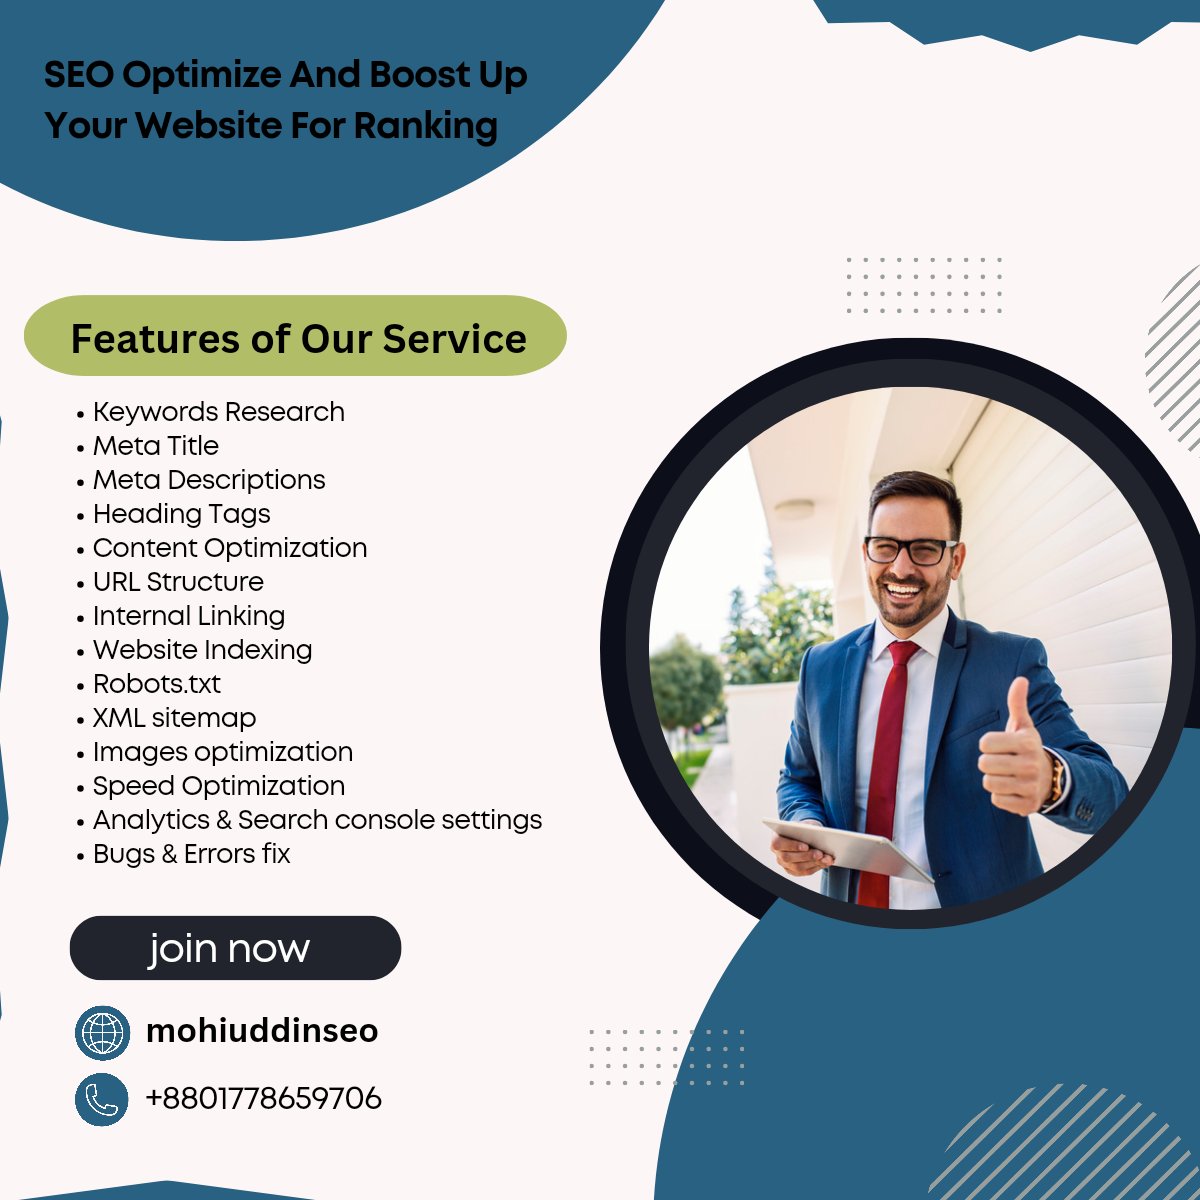 🚀 Boost Your Website's Ranking with SEO Optimization! 📈
Are you looking to climb the search engine ladder and drive more traffic to your website? 📢💻 Look no further!
shorturl.at/ktPQ4
#SEO #SearchEngineOptimization #WebsiteRanking #DigitalMarketing #BoostYourVisibility